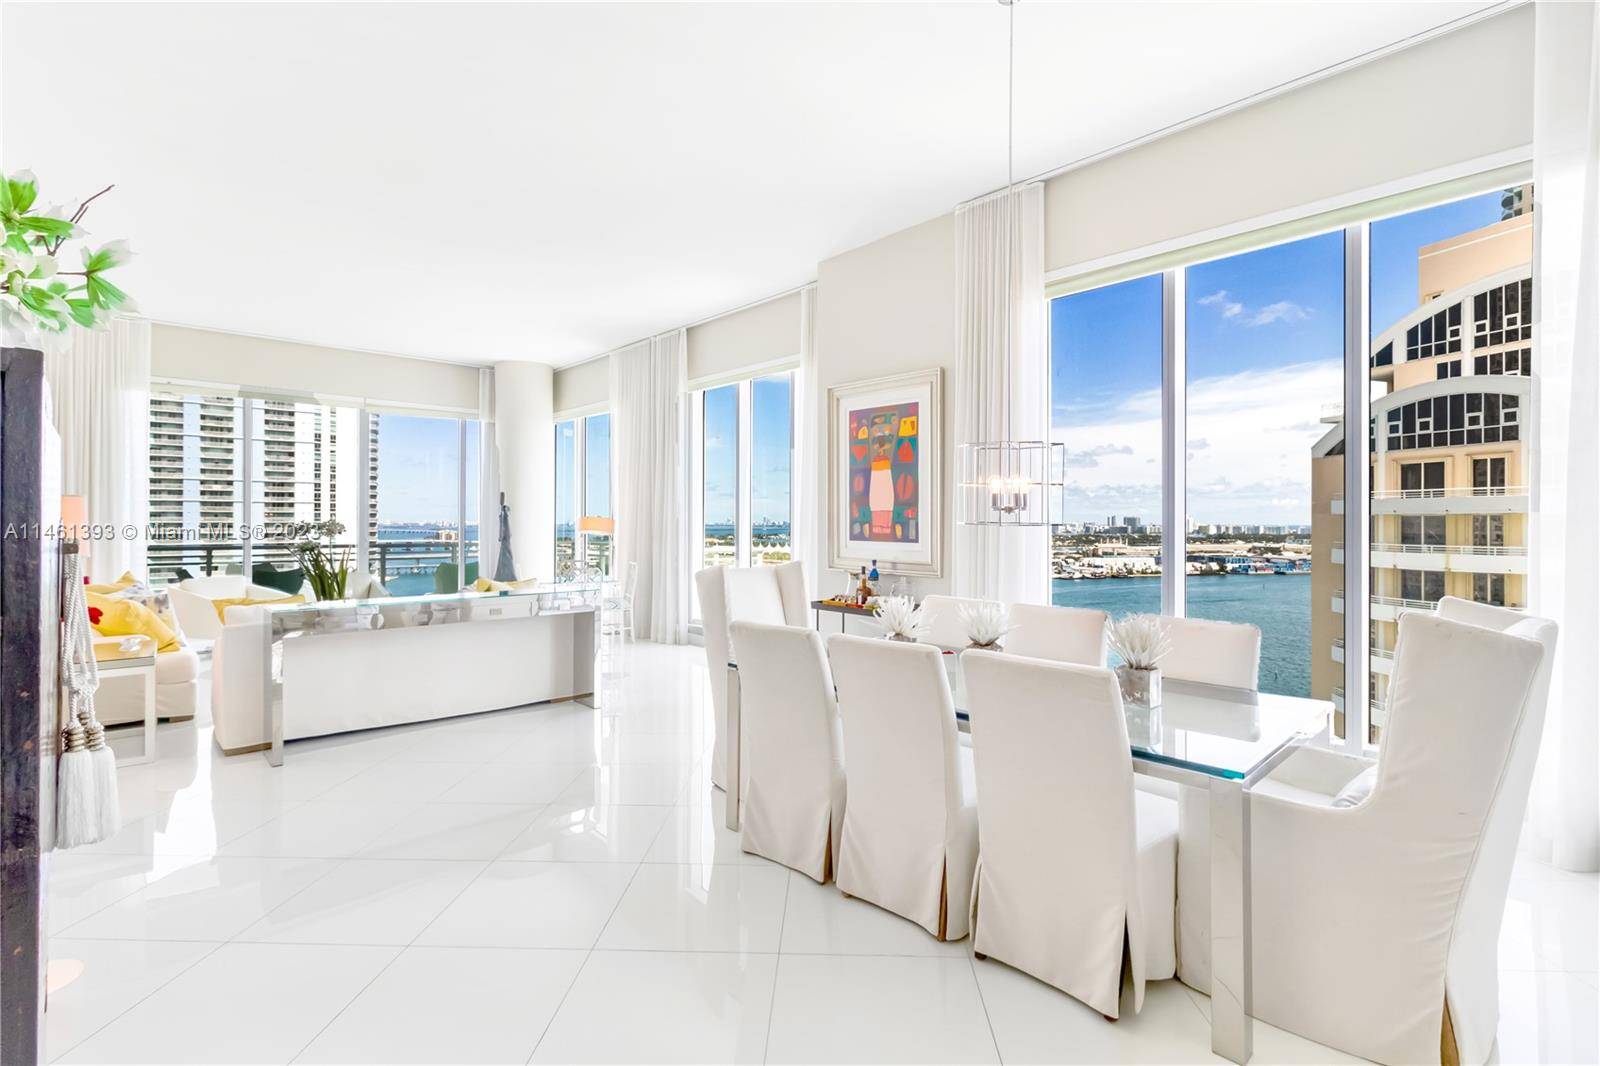 Stunning residence in Asia Brickell Key, one of the most exclusive and luxurious boutique buildings in Miami !